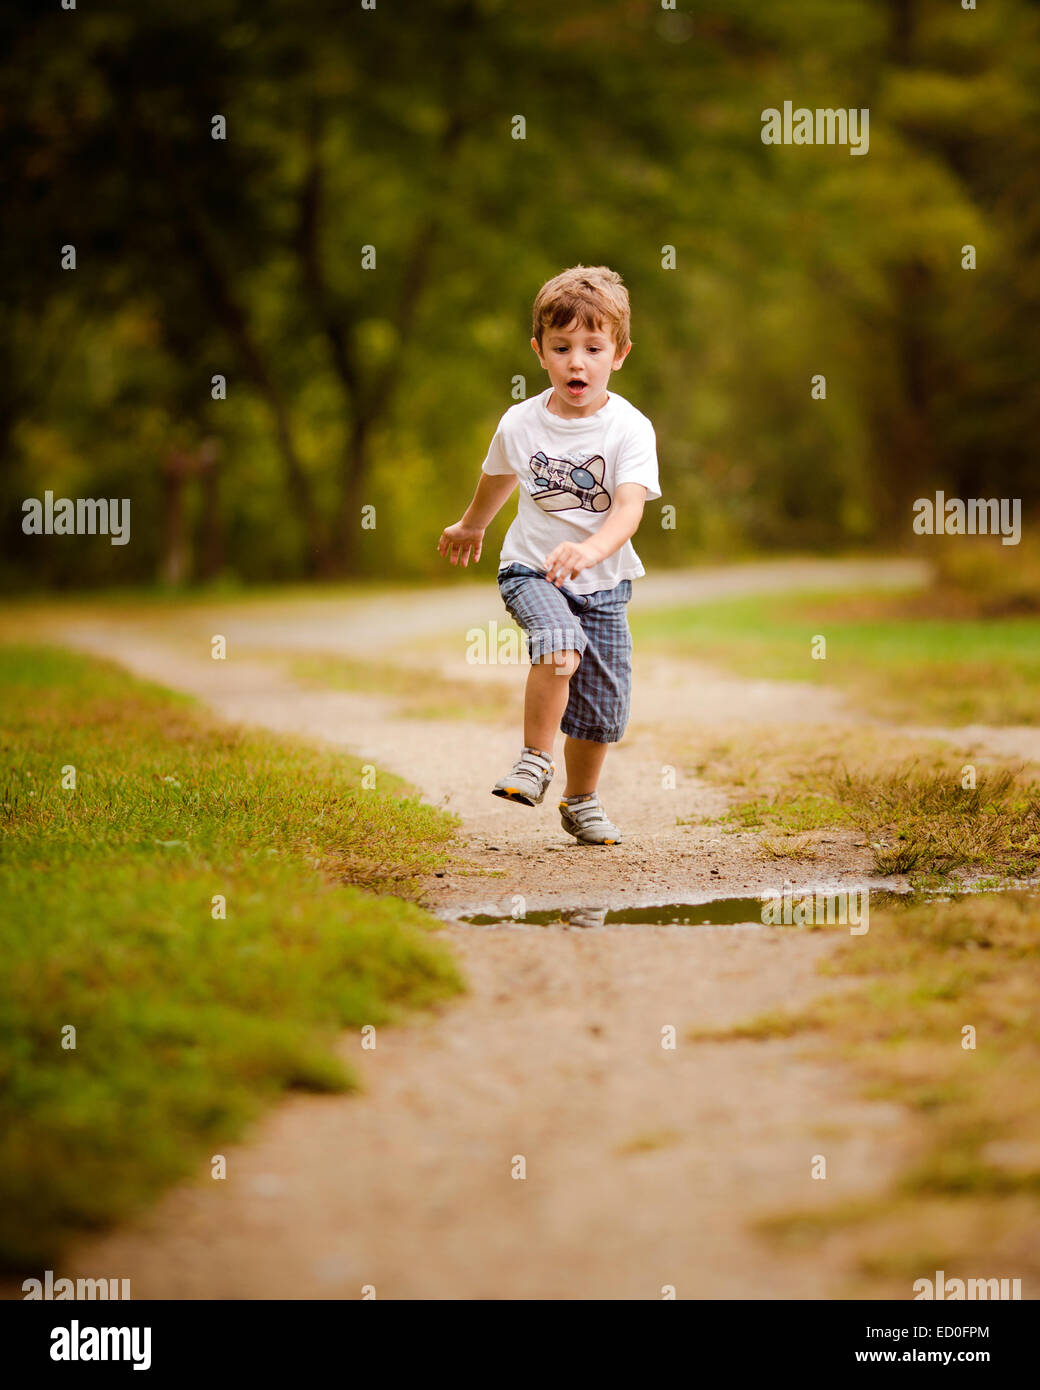 Boy running along footpath about to jump over a puddle Stock Photo